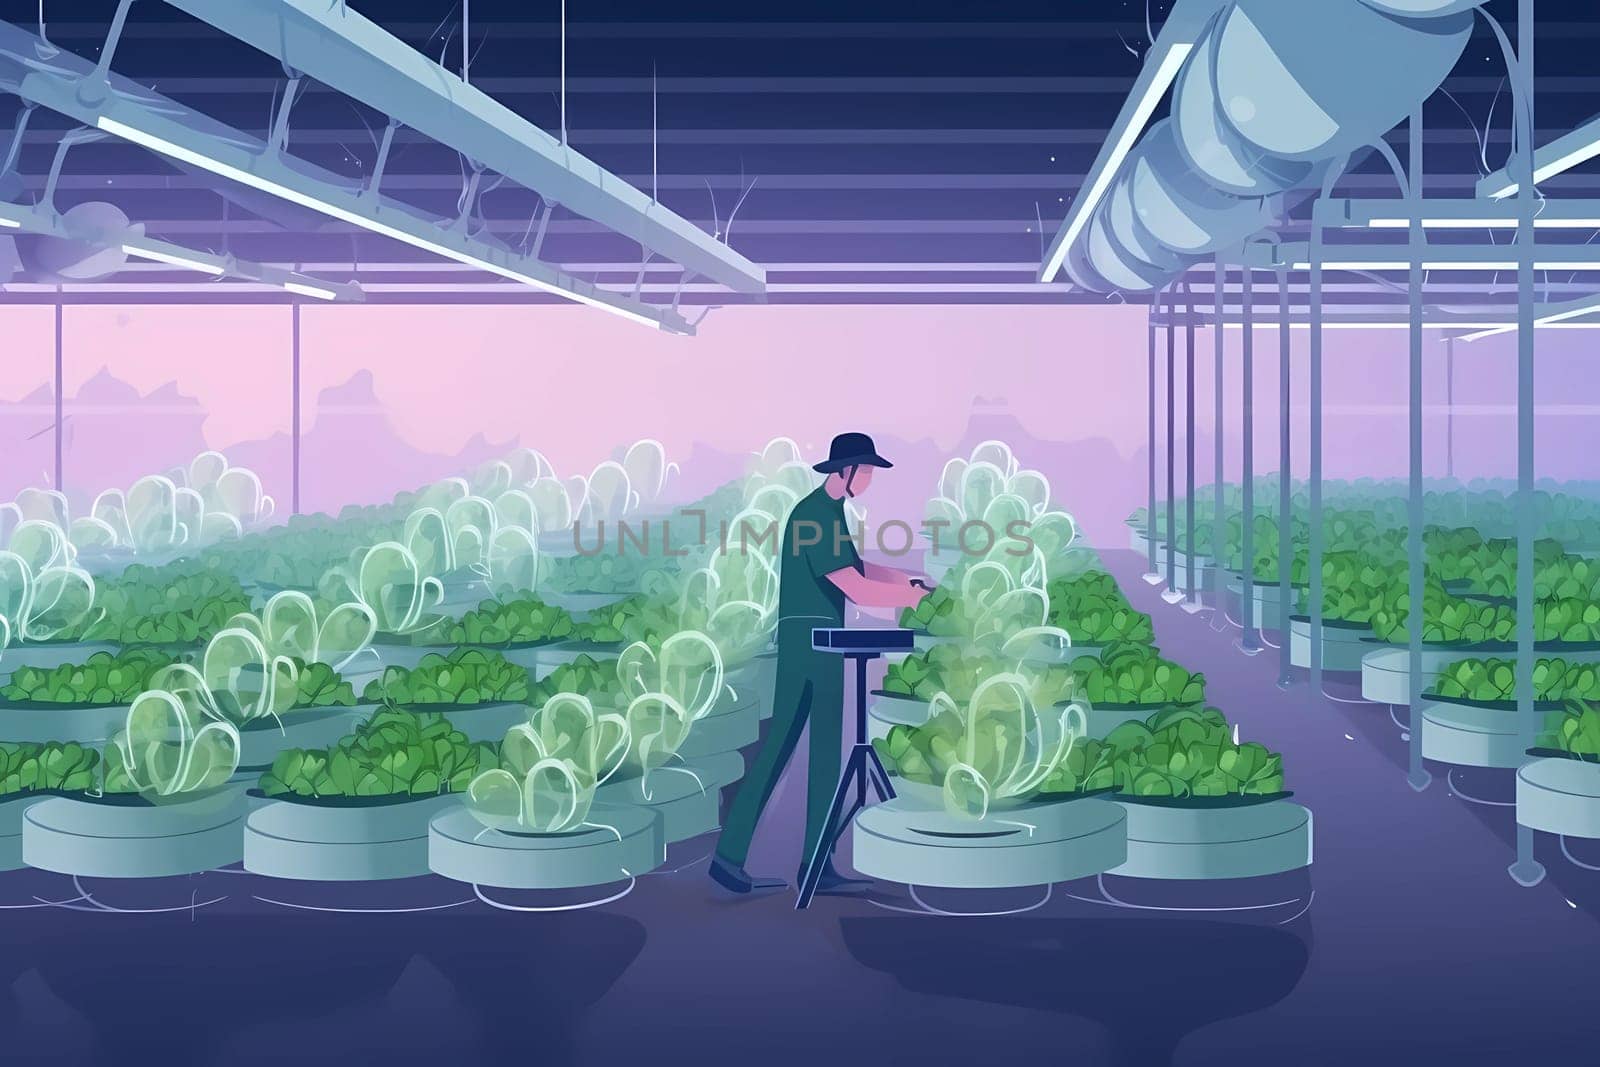 An illustration of a man working in a greenhouse with plants growing on the top.